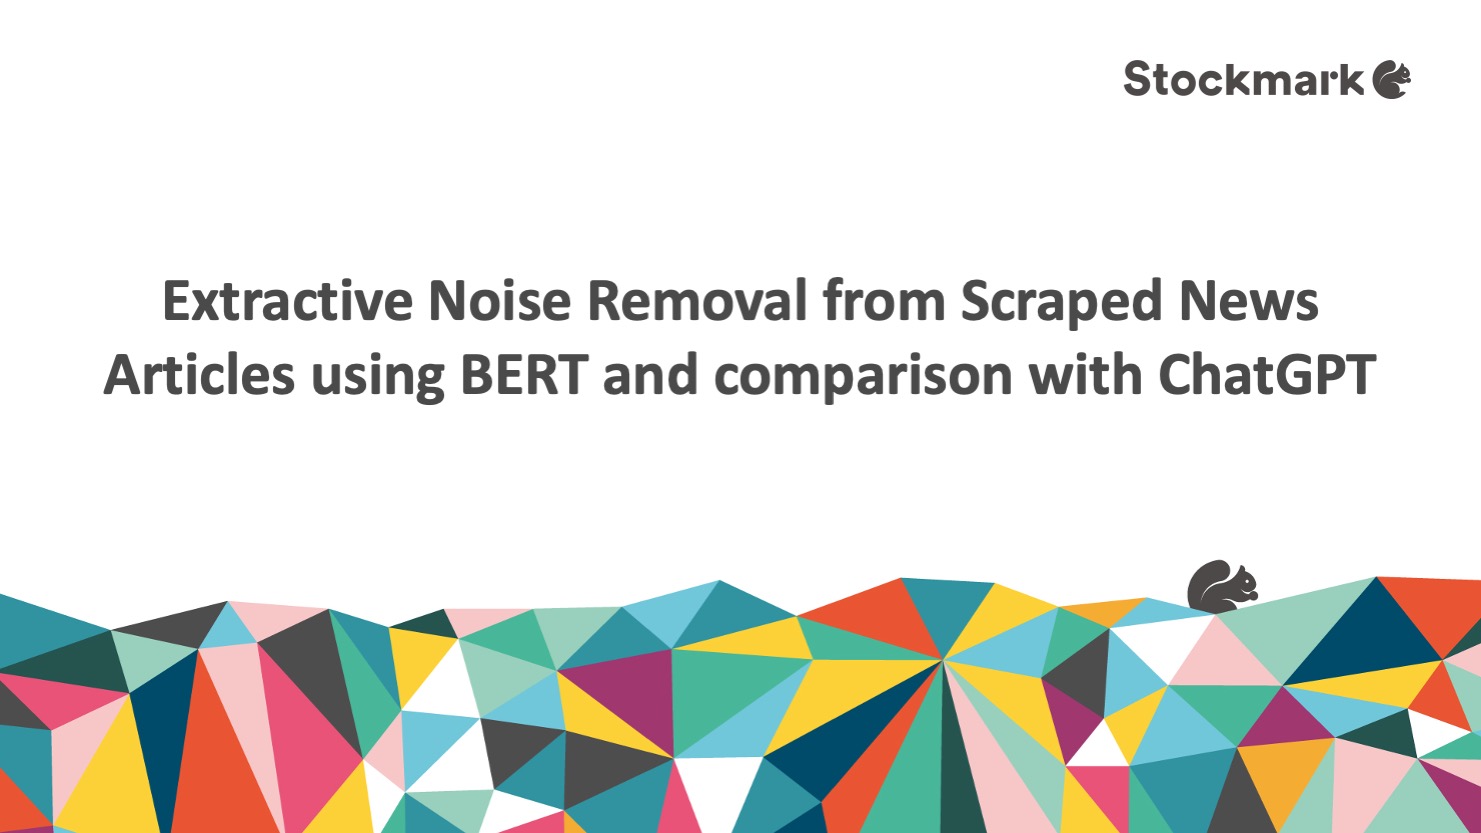 Extractive Noise Removal from Scraped News Articles using BERT and comparison with ChatGPT